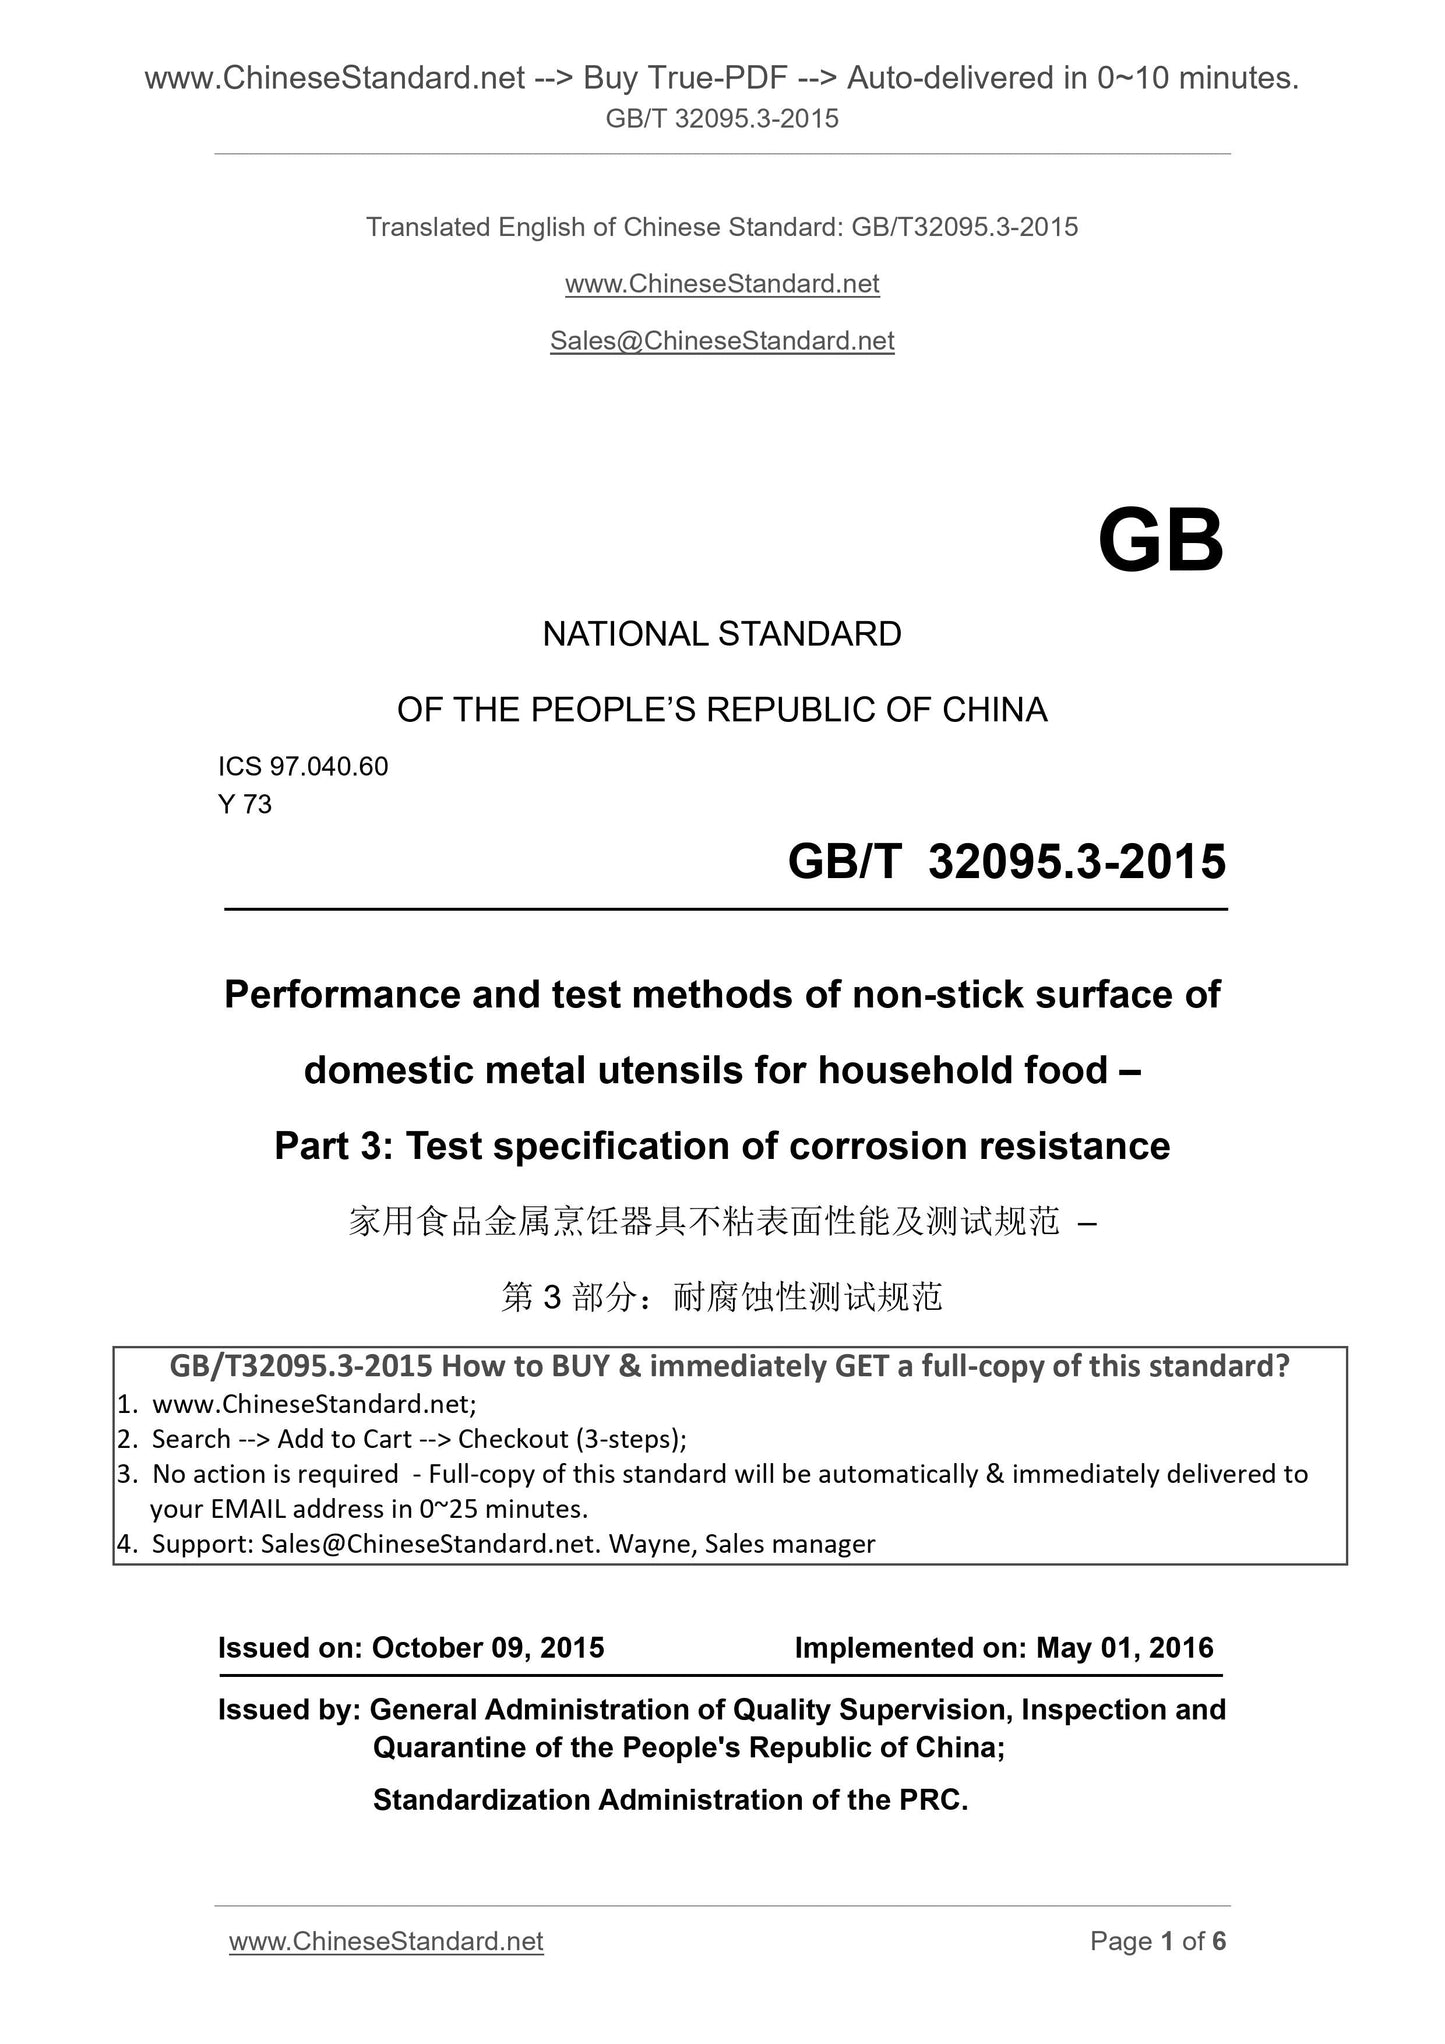 GB/T 32095.3-2015 Page 1